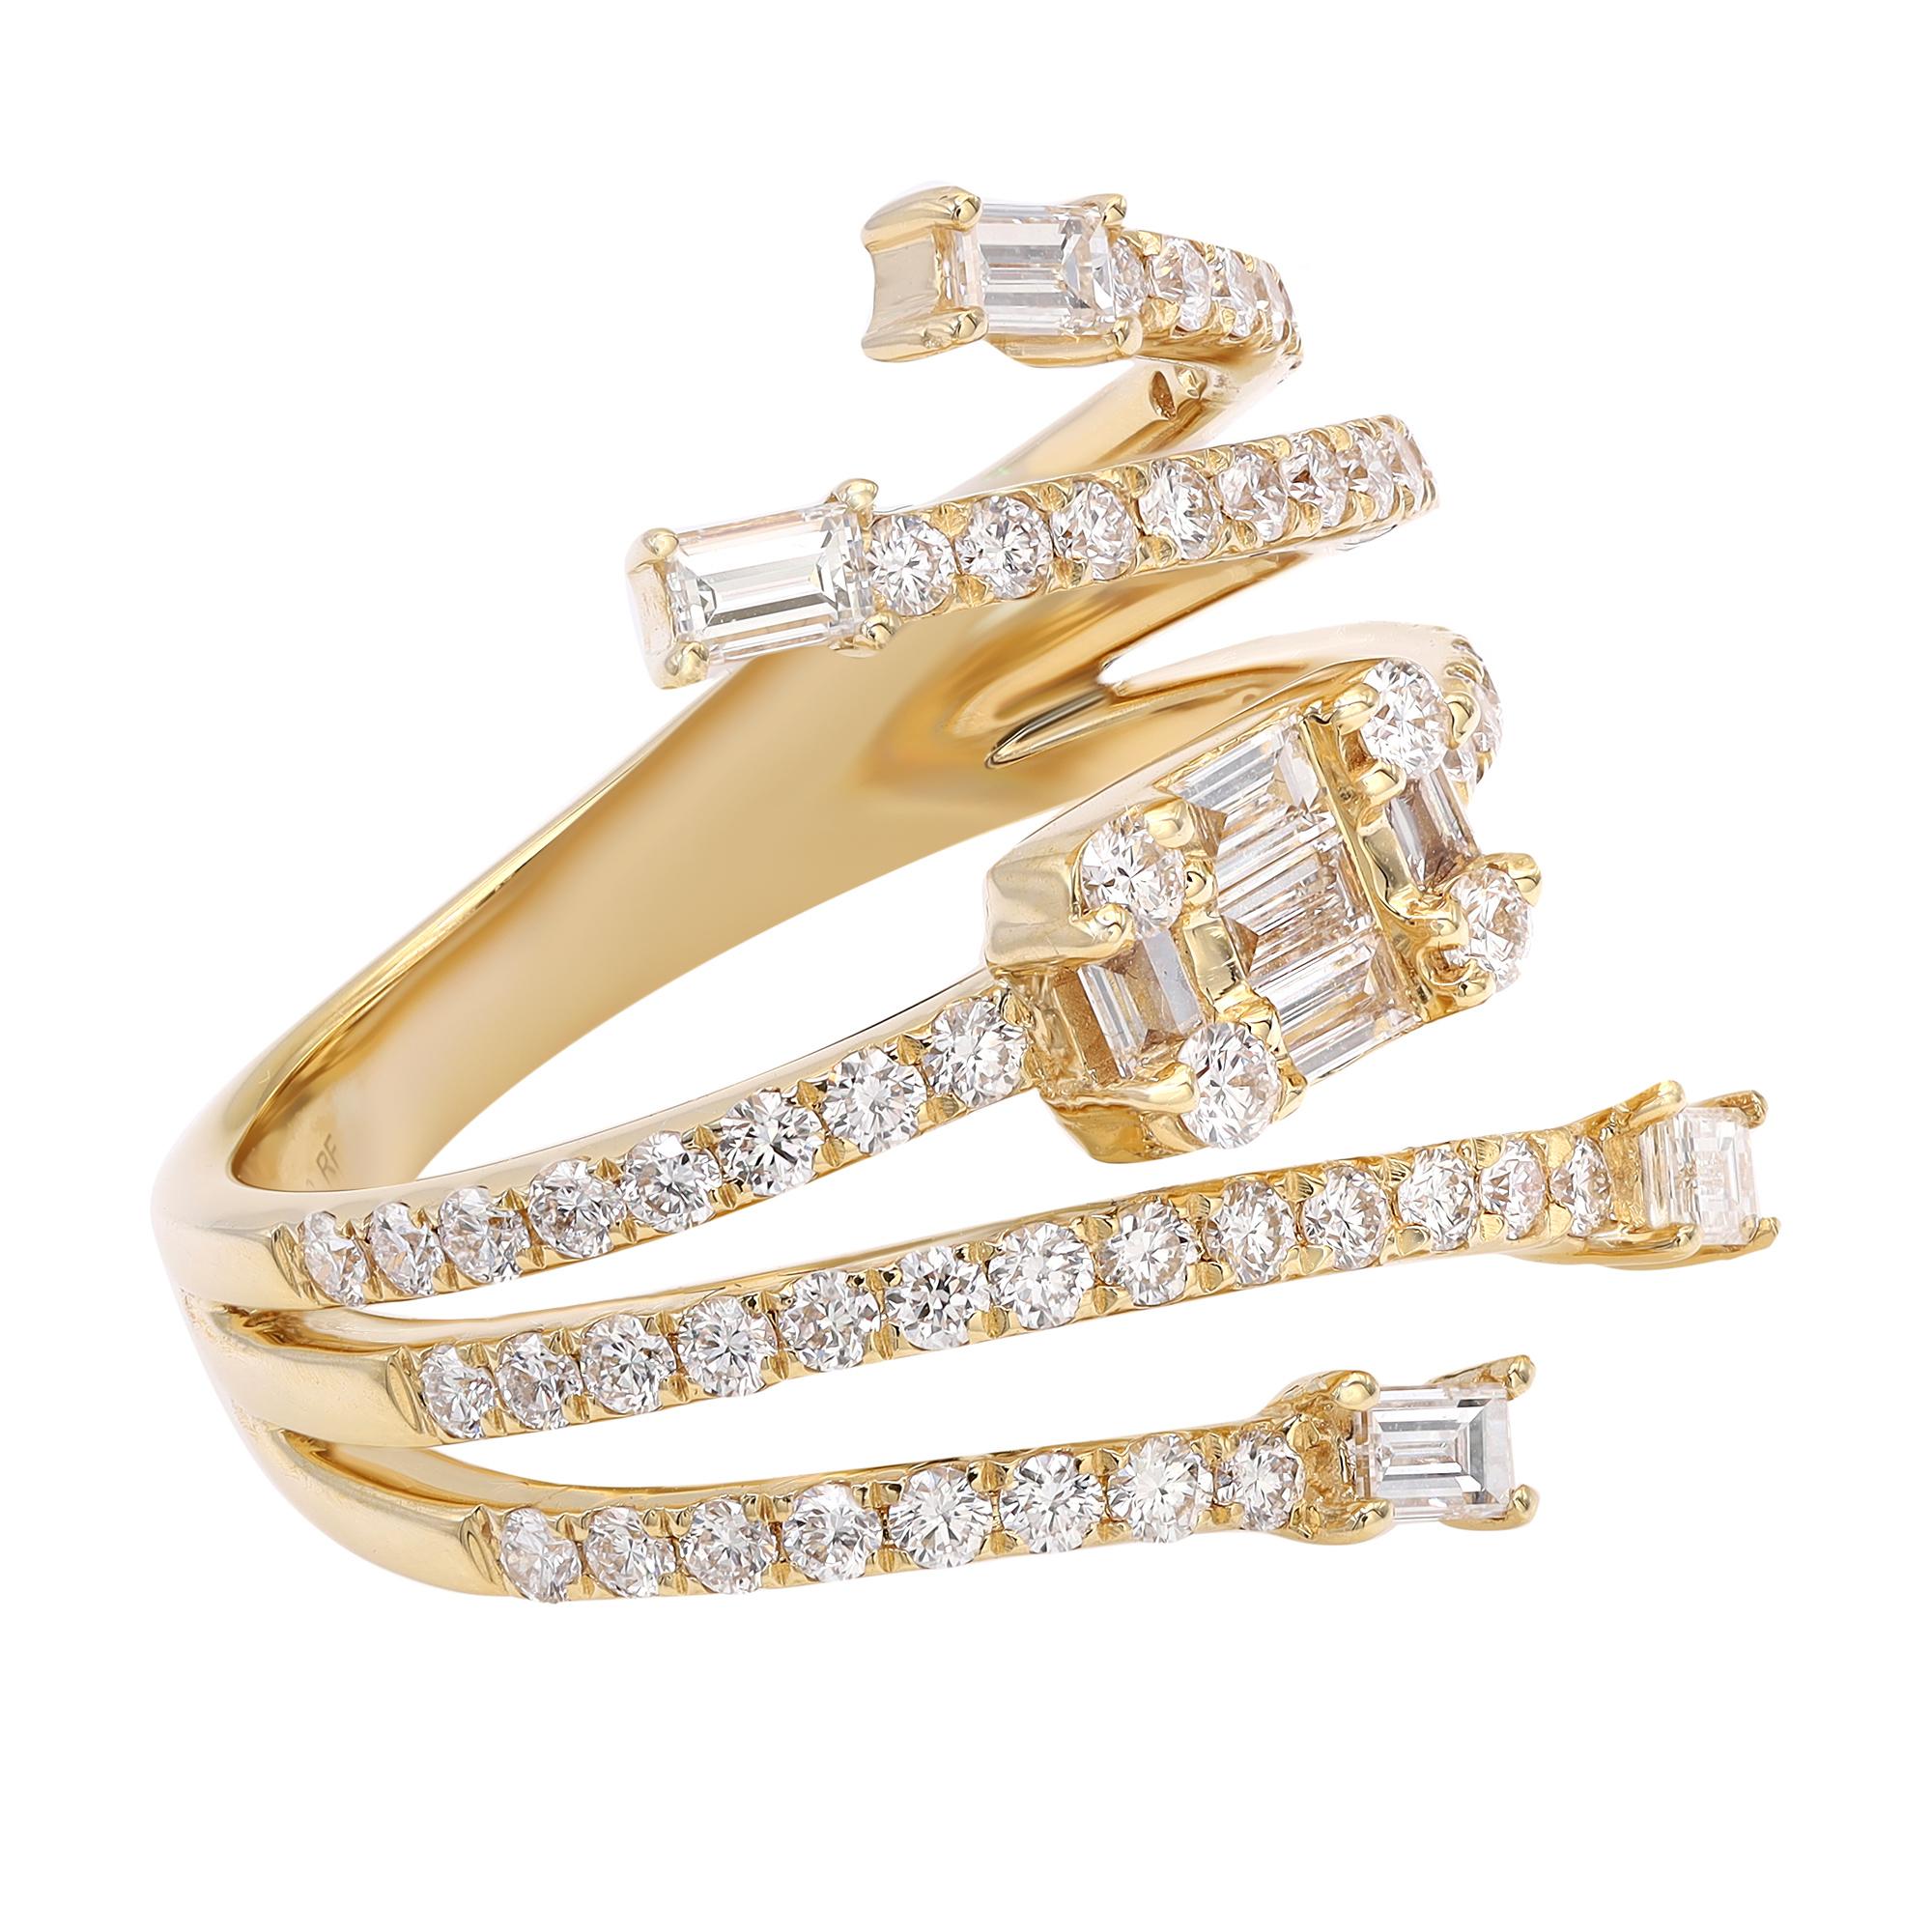 This stunning diamond ring comes with a flashy statement look. A must have in your jewelry collection. Crafted in 18K yellow gold. This ring features baguette and round cut diamonds weighing 1.21 carats in prong and channel setting. Diamond color